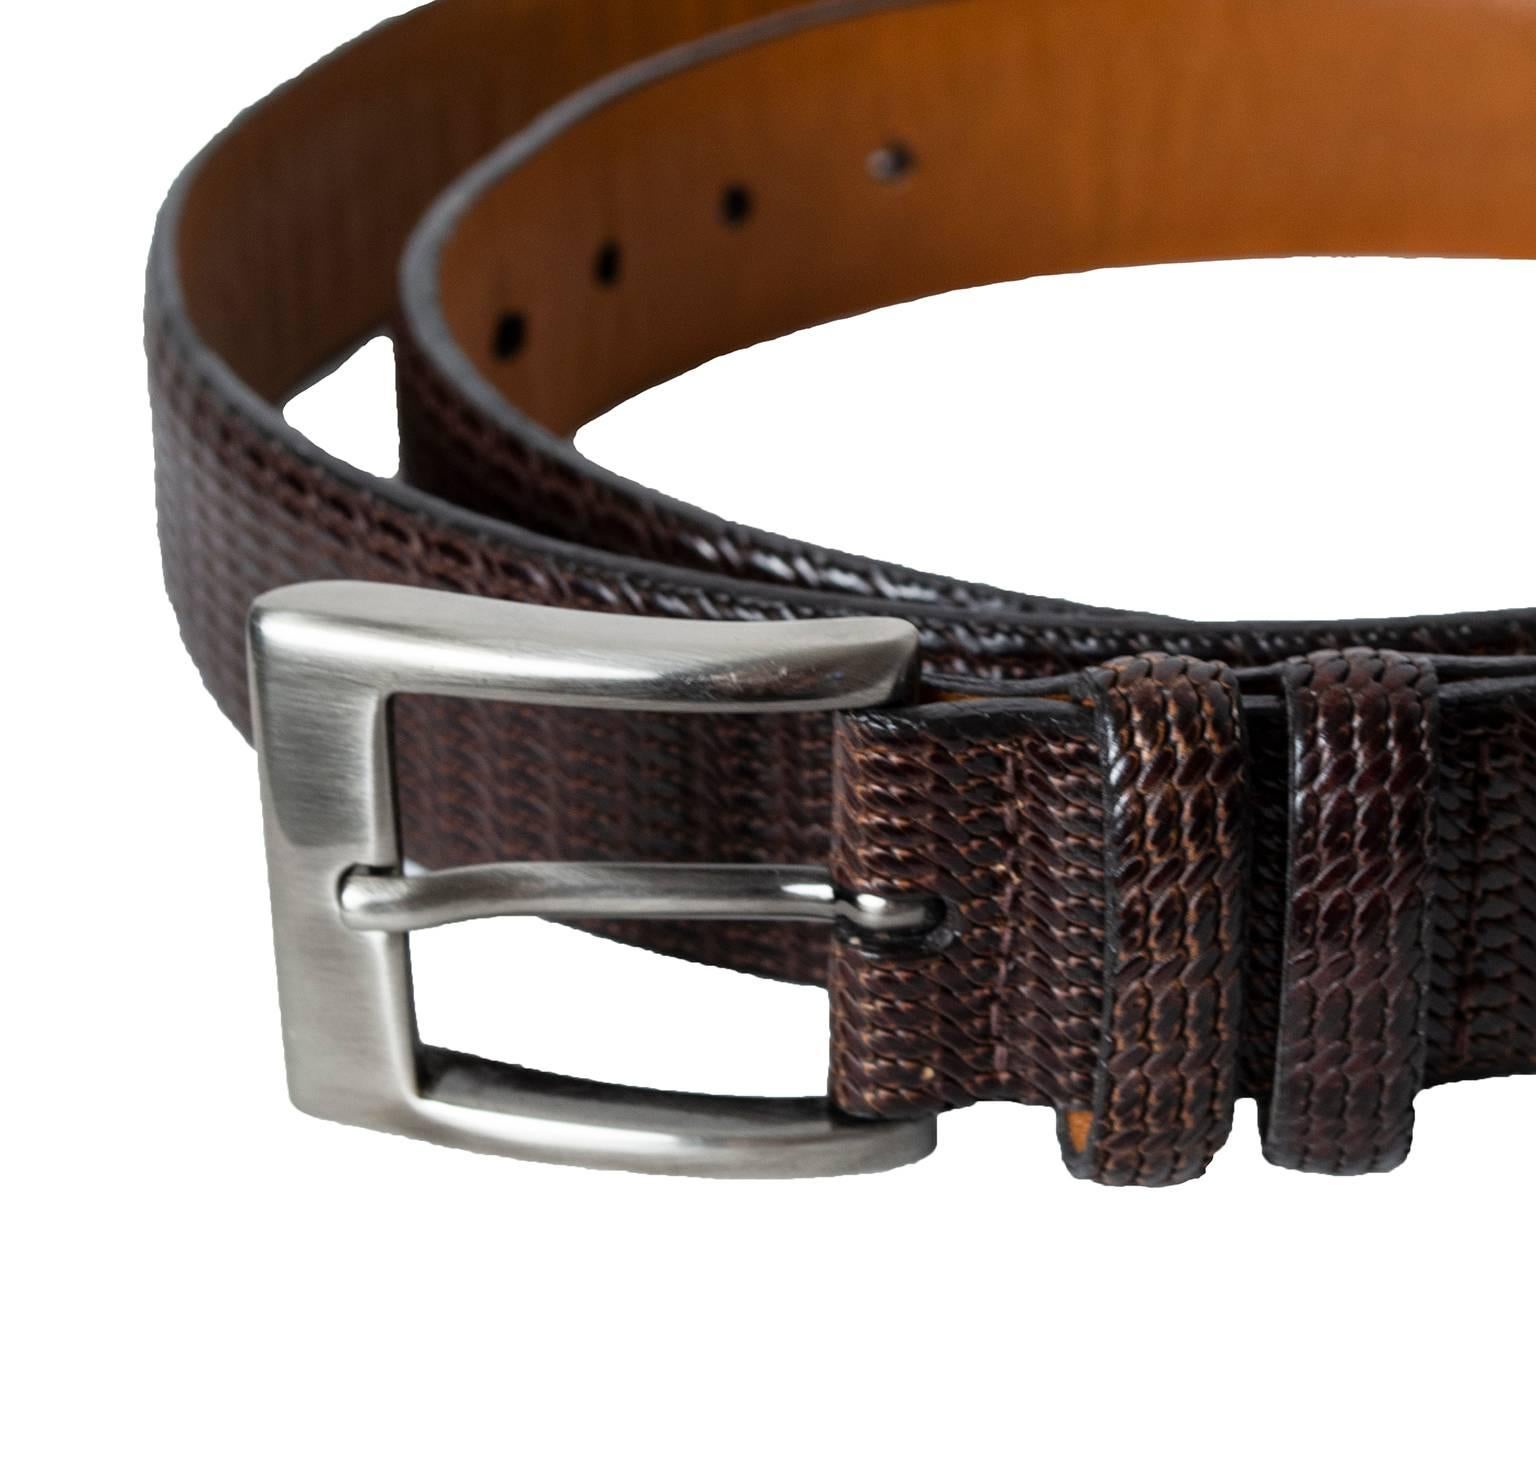 Though it appears to be woven straw—or even lizard skin—this beautifully-textured belt is actually a single piece of finely-embossed leather. Its rich mahogany brown color is elegantly offset by the substantial brushed silver buckle.

Textured